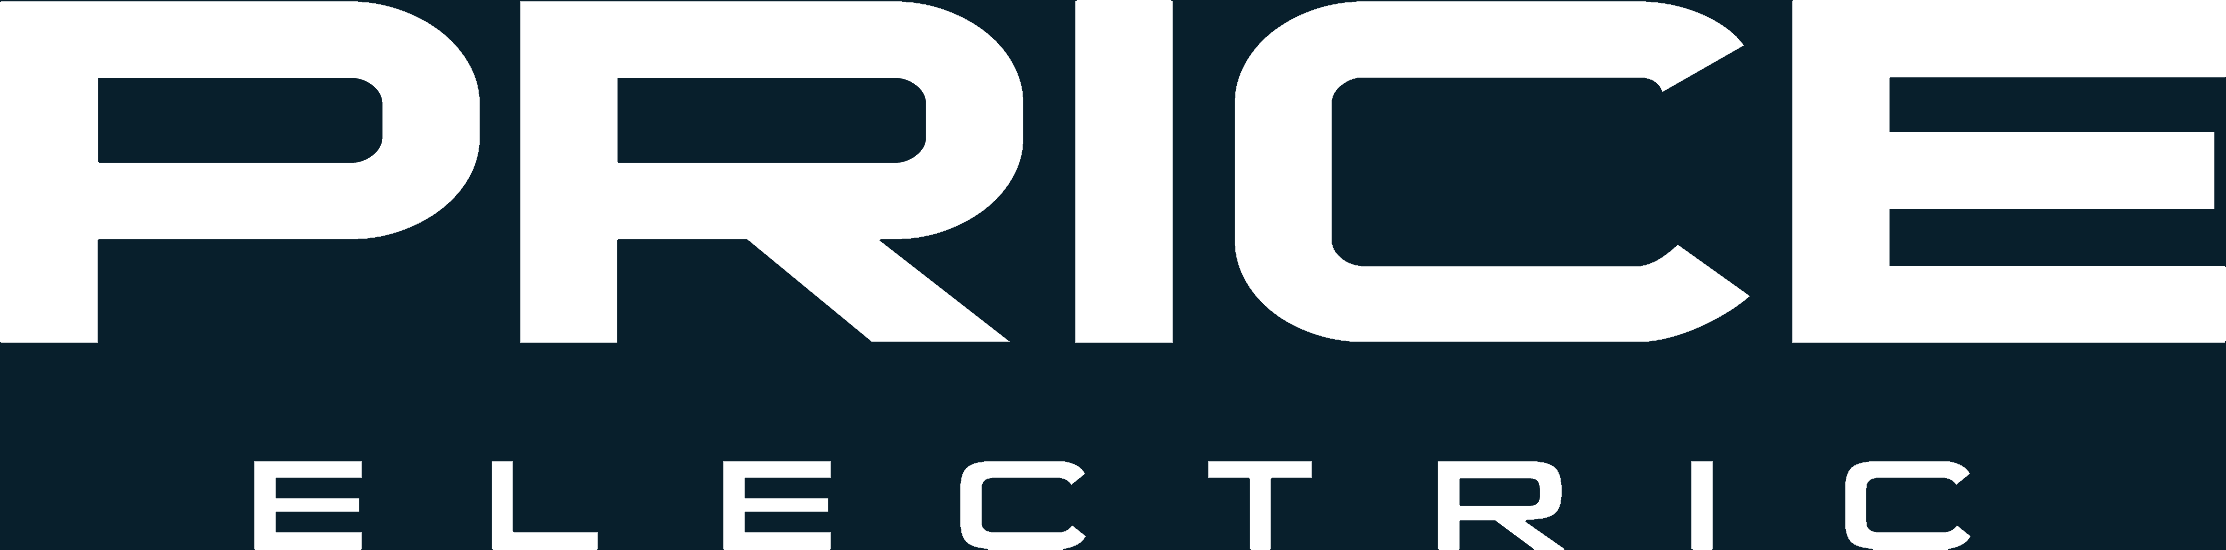 Company logo for 'Price Electric'.